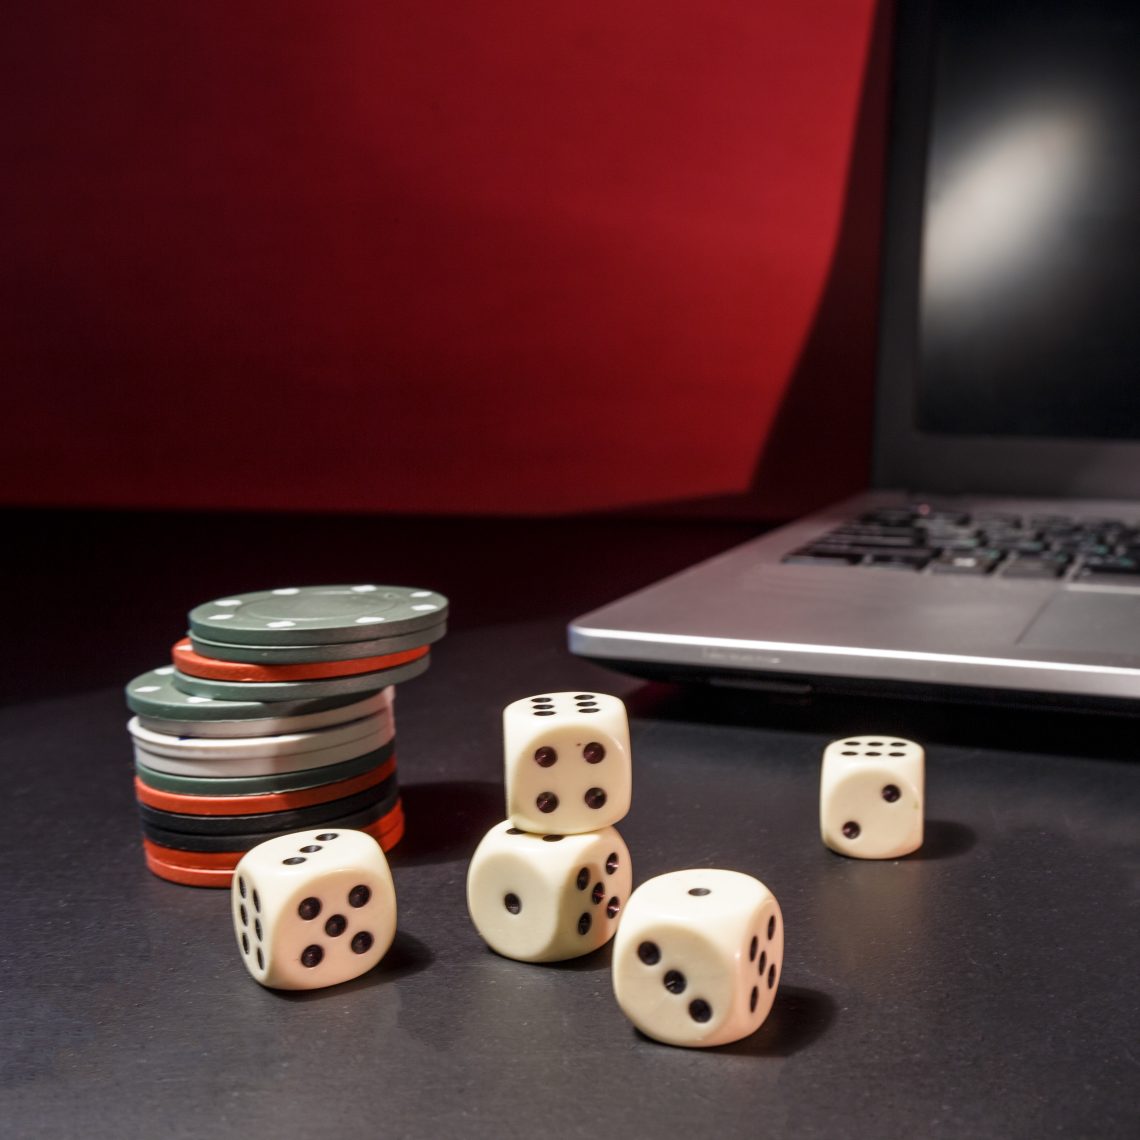 The Psychology of iGaming: Why We Love Online Casinos - Cliché Magazine